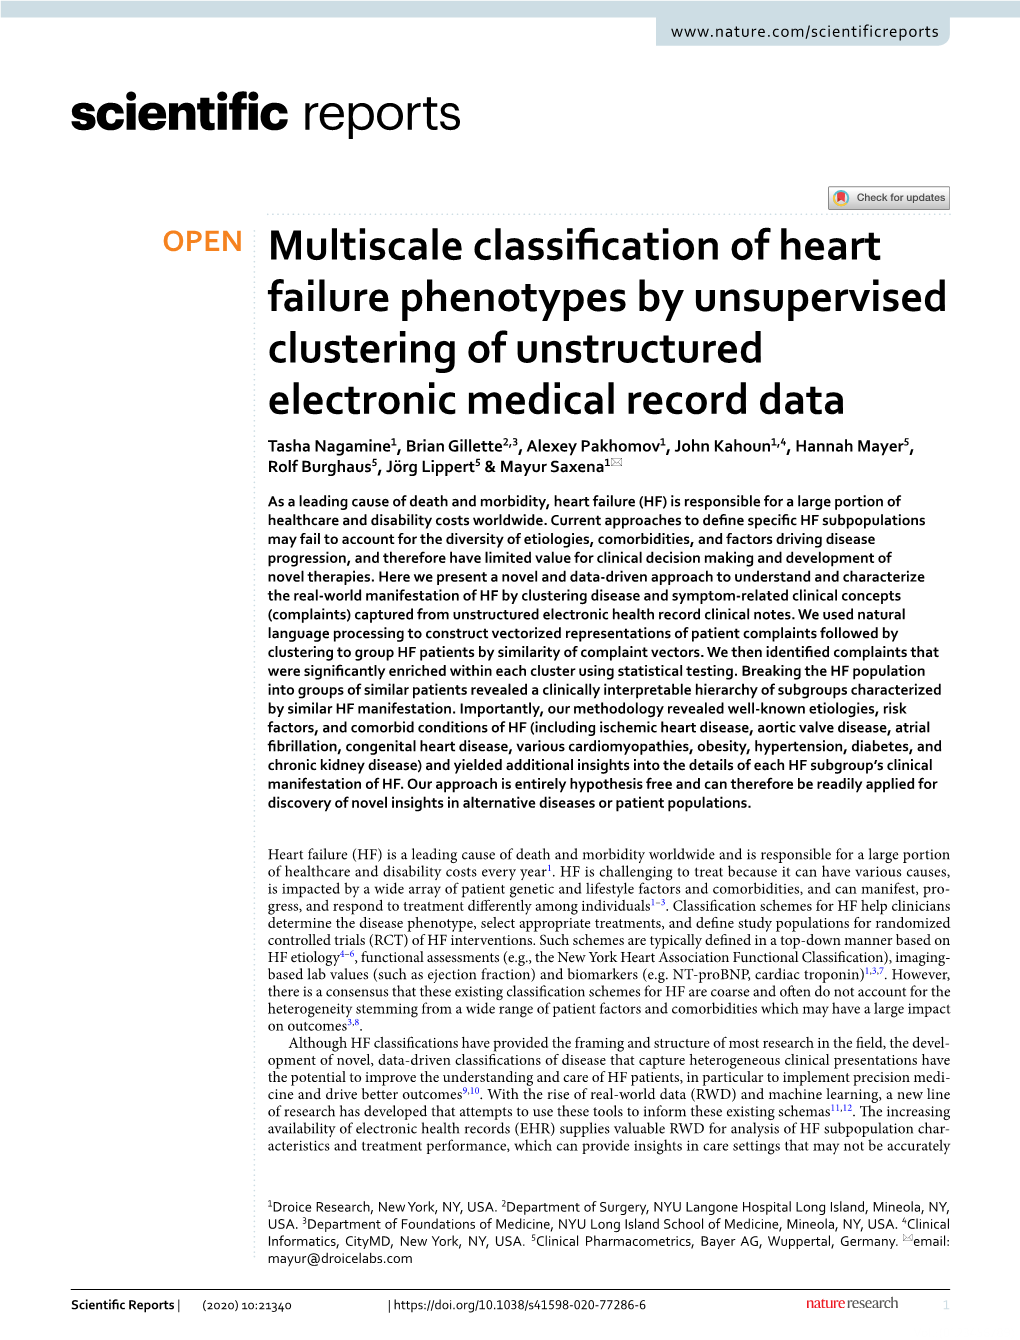 Multiscale Classification of Heart Failure Phenotypes by Unsupervised